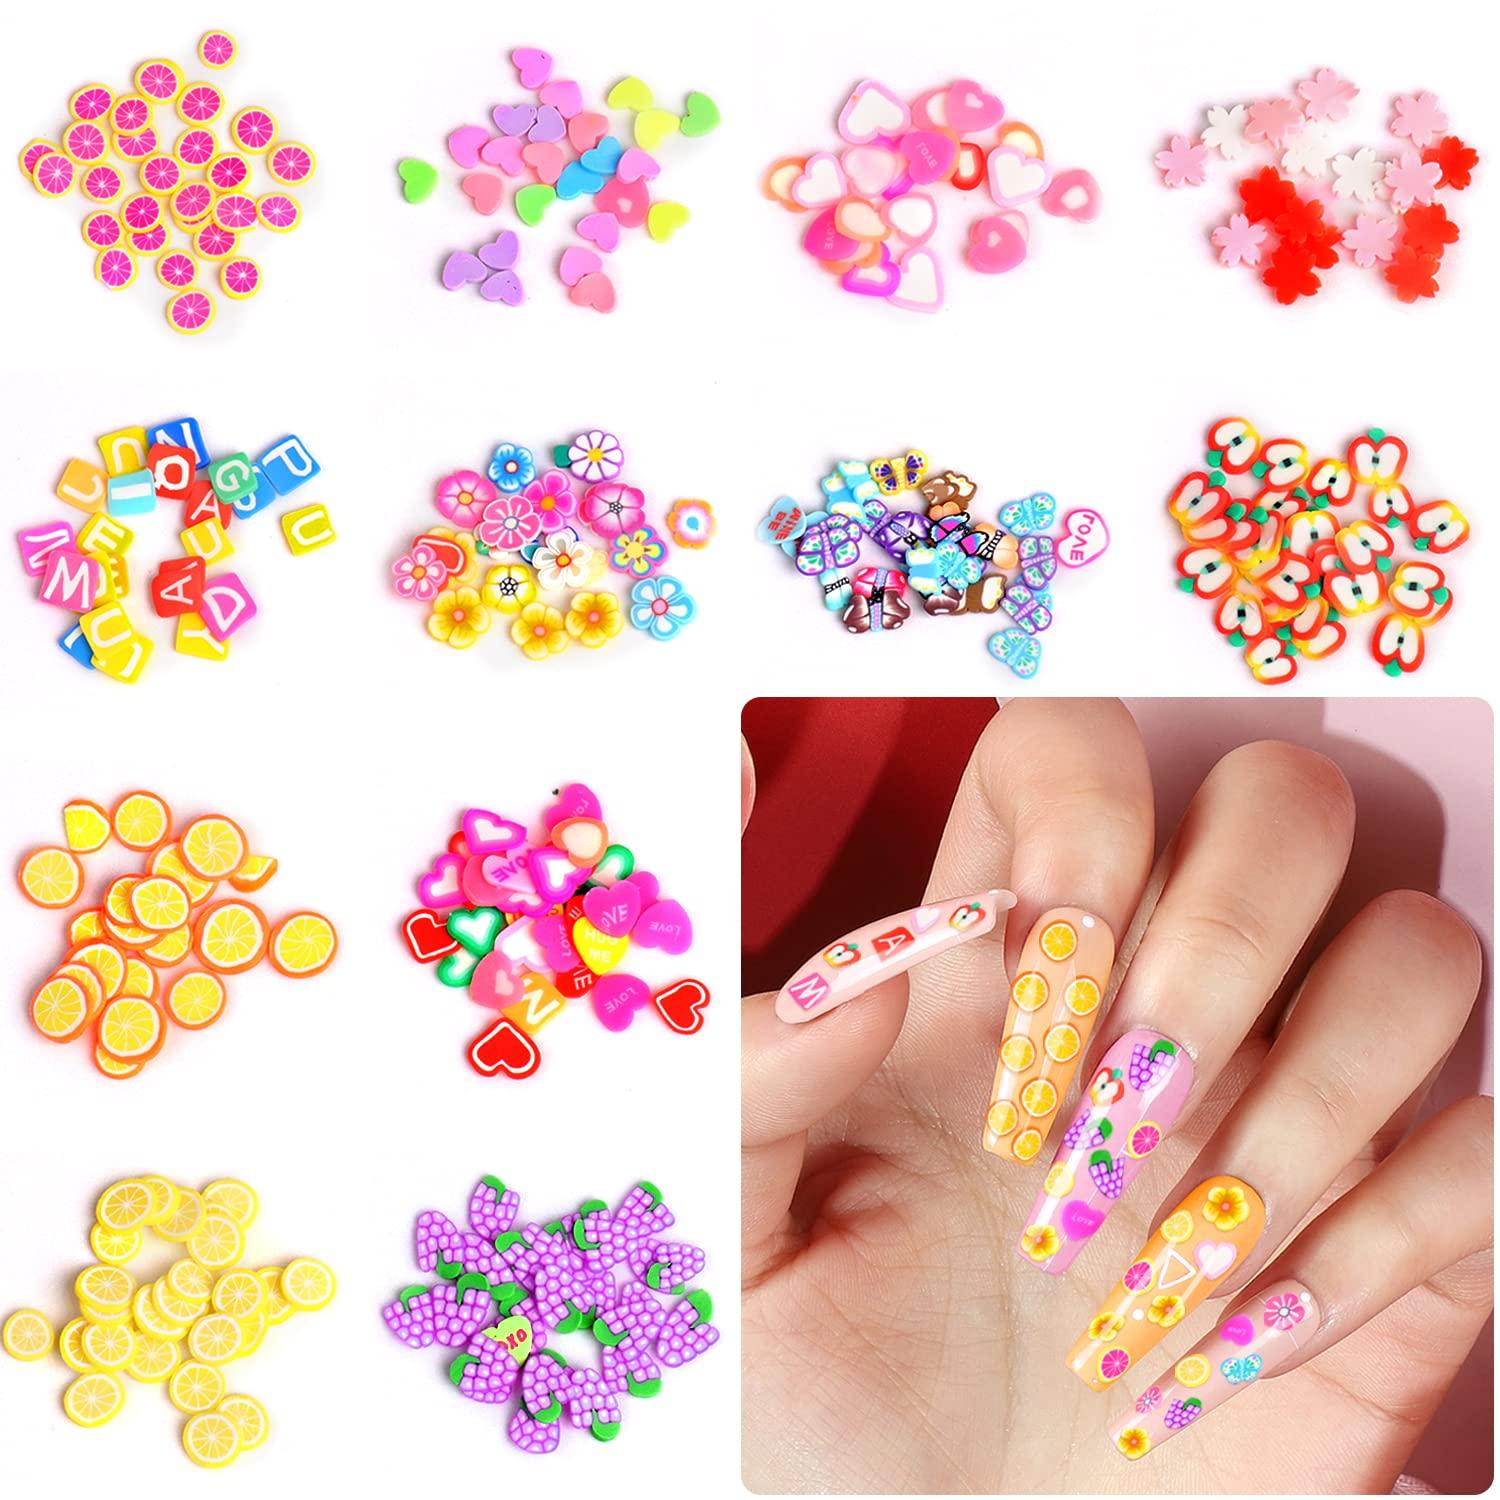 Asalle Nail Art Decorations with Gems, 8 Boxes Nails Rhinestones with Dried  Flowers for Acrylic Nails Kit, Nail Design Kit with 3 Pcs Nail Art  Stickers, Nail Glitter Sequins Multicolor